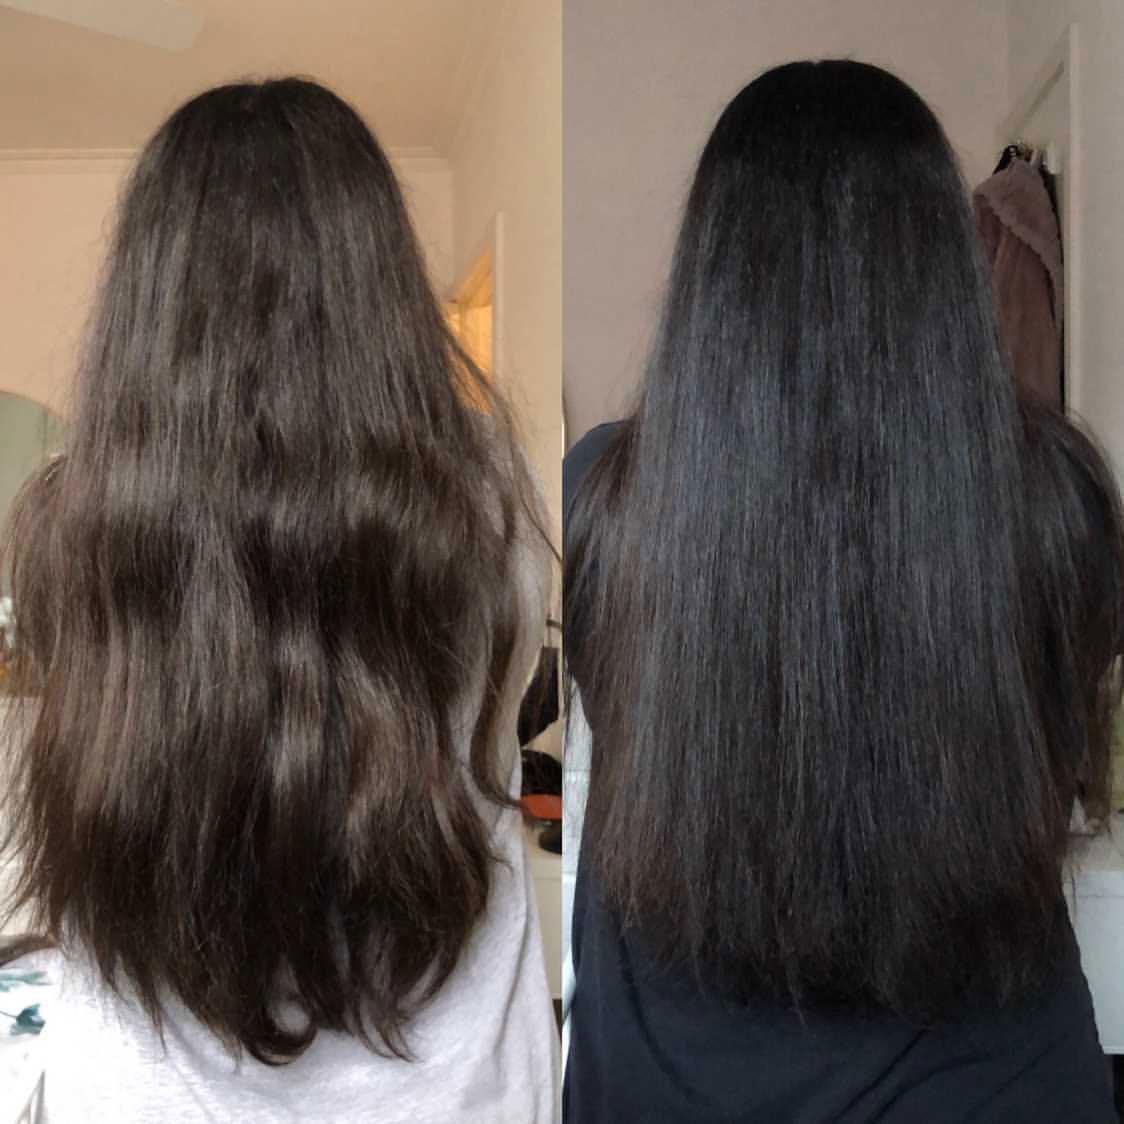 A before and after photo showing a user&#x27;s hair looking healthier and stronger after the treatment